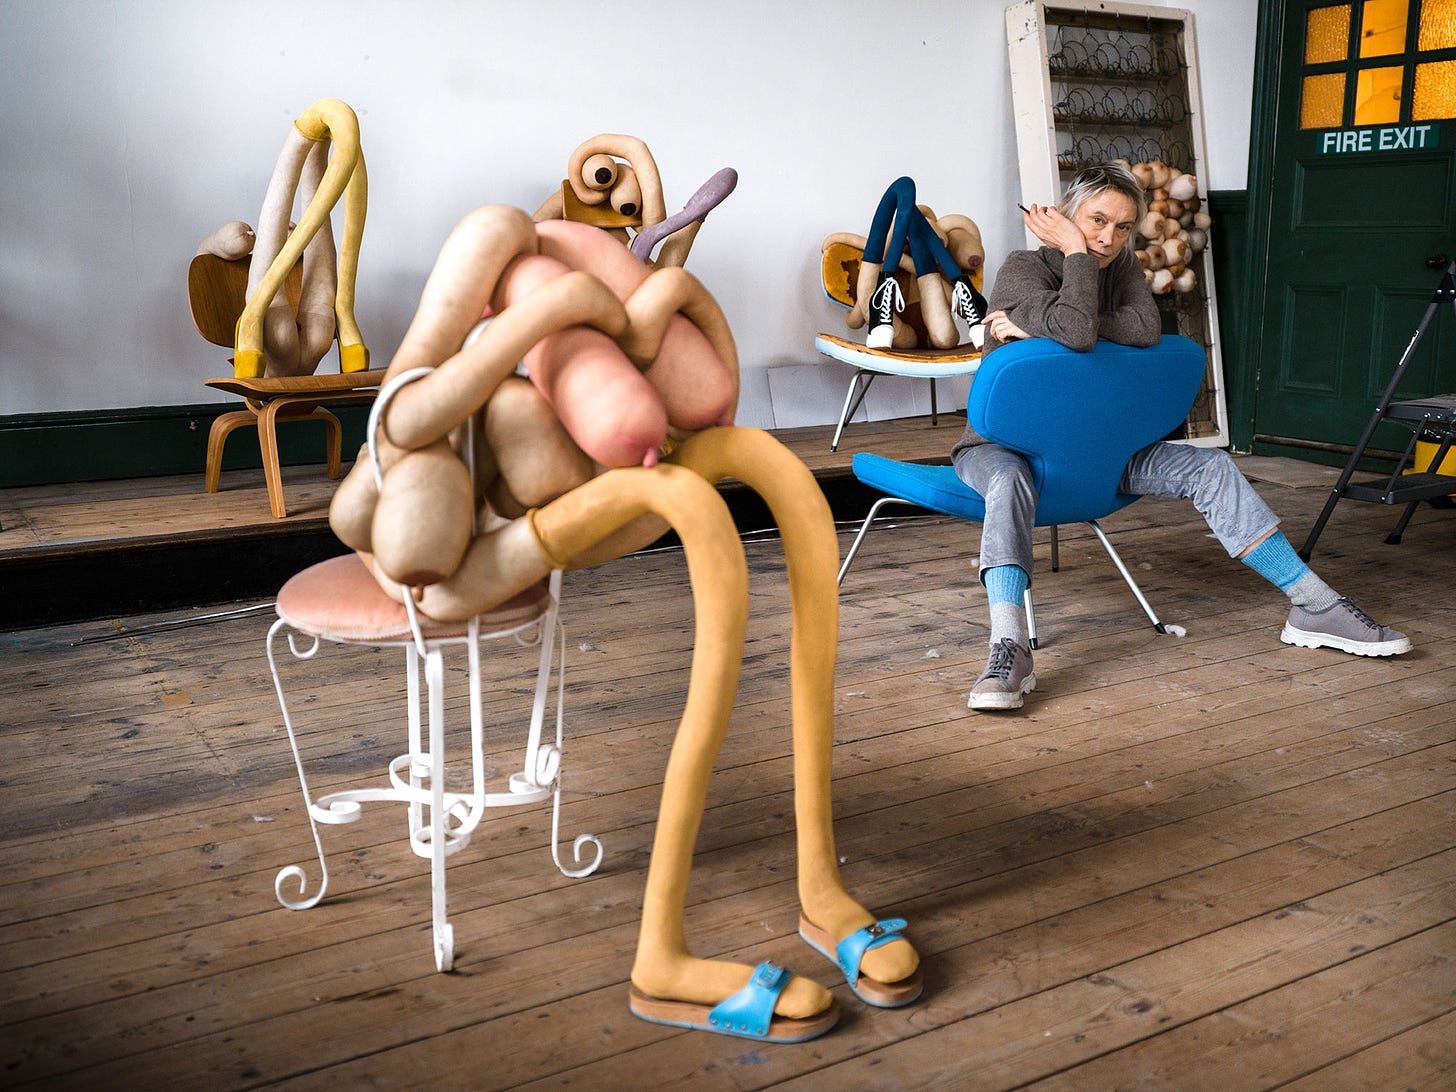 Project 1: Sarah Lucas - National Gallery of Australia